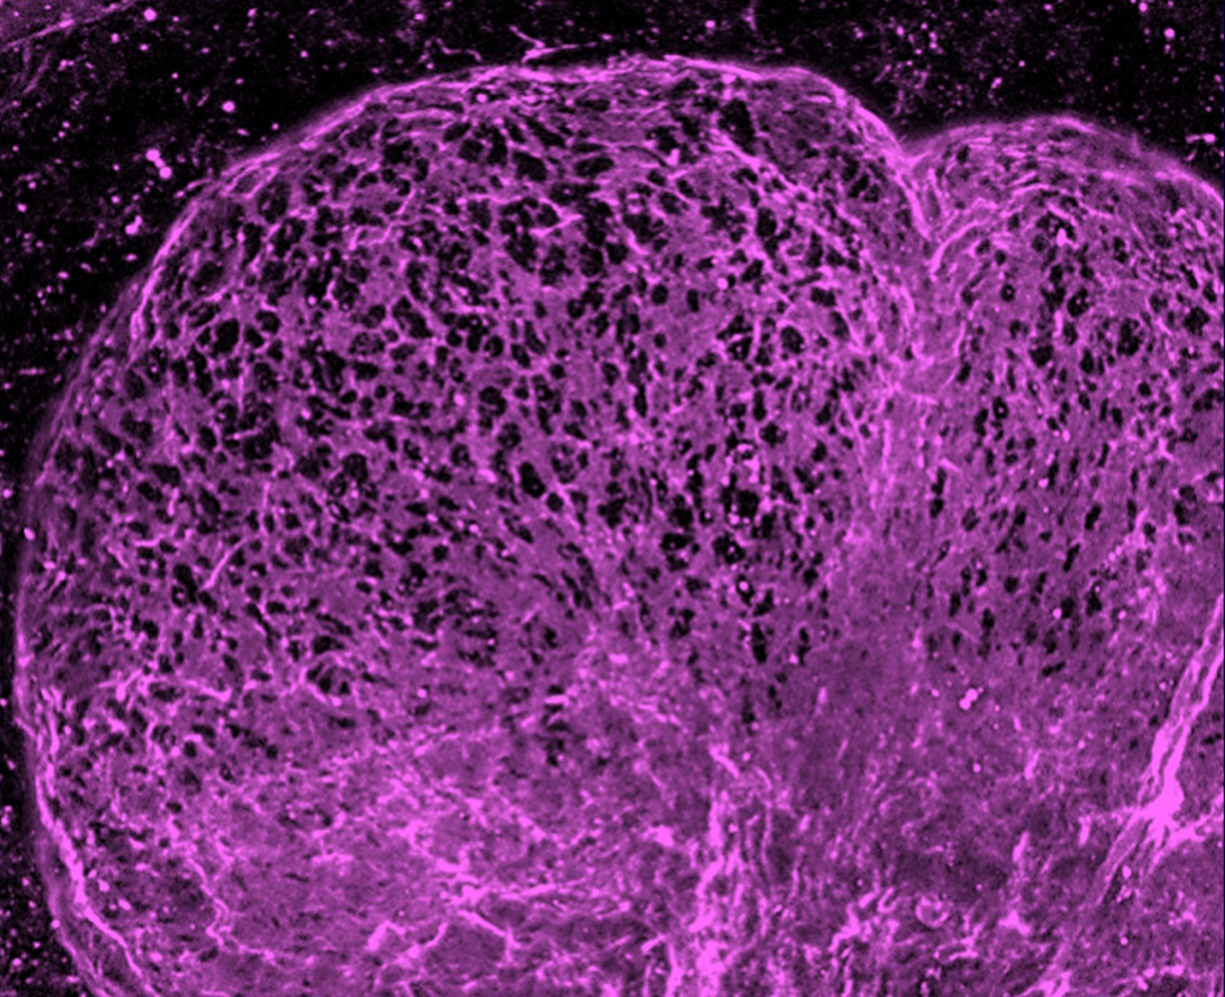 christmas party lab wing photoMicro-perforations (black) in mouse salivary gland epithelial basement membrane stained for collagen IV (magenta); note the numerous perforations concentrated at the tip of the expanding bud region (upper half of image).